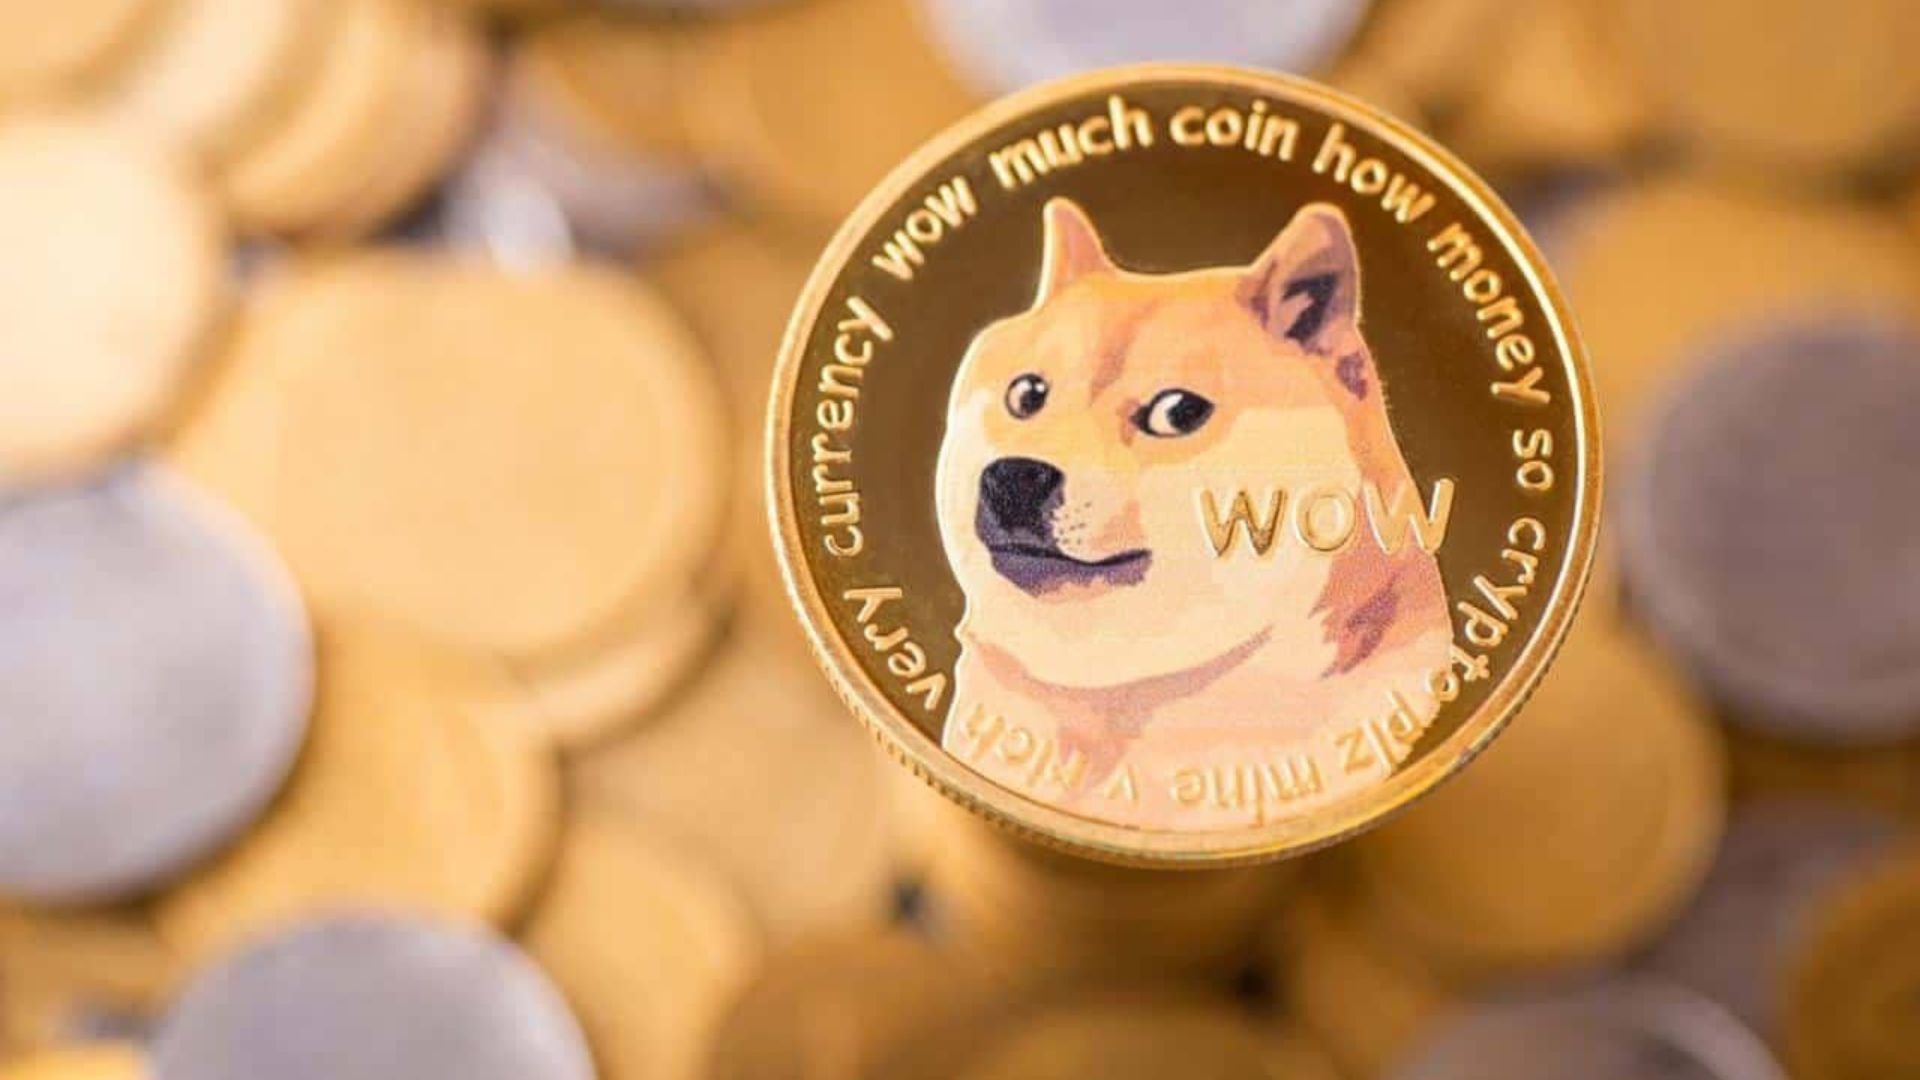 Dogecoin Price Prediction: DOGE Plunges 7% As Meme Coin Investors Flock To This Low-Key Presale That Might Explode